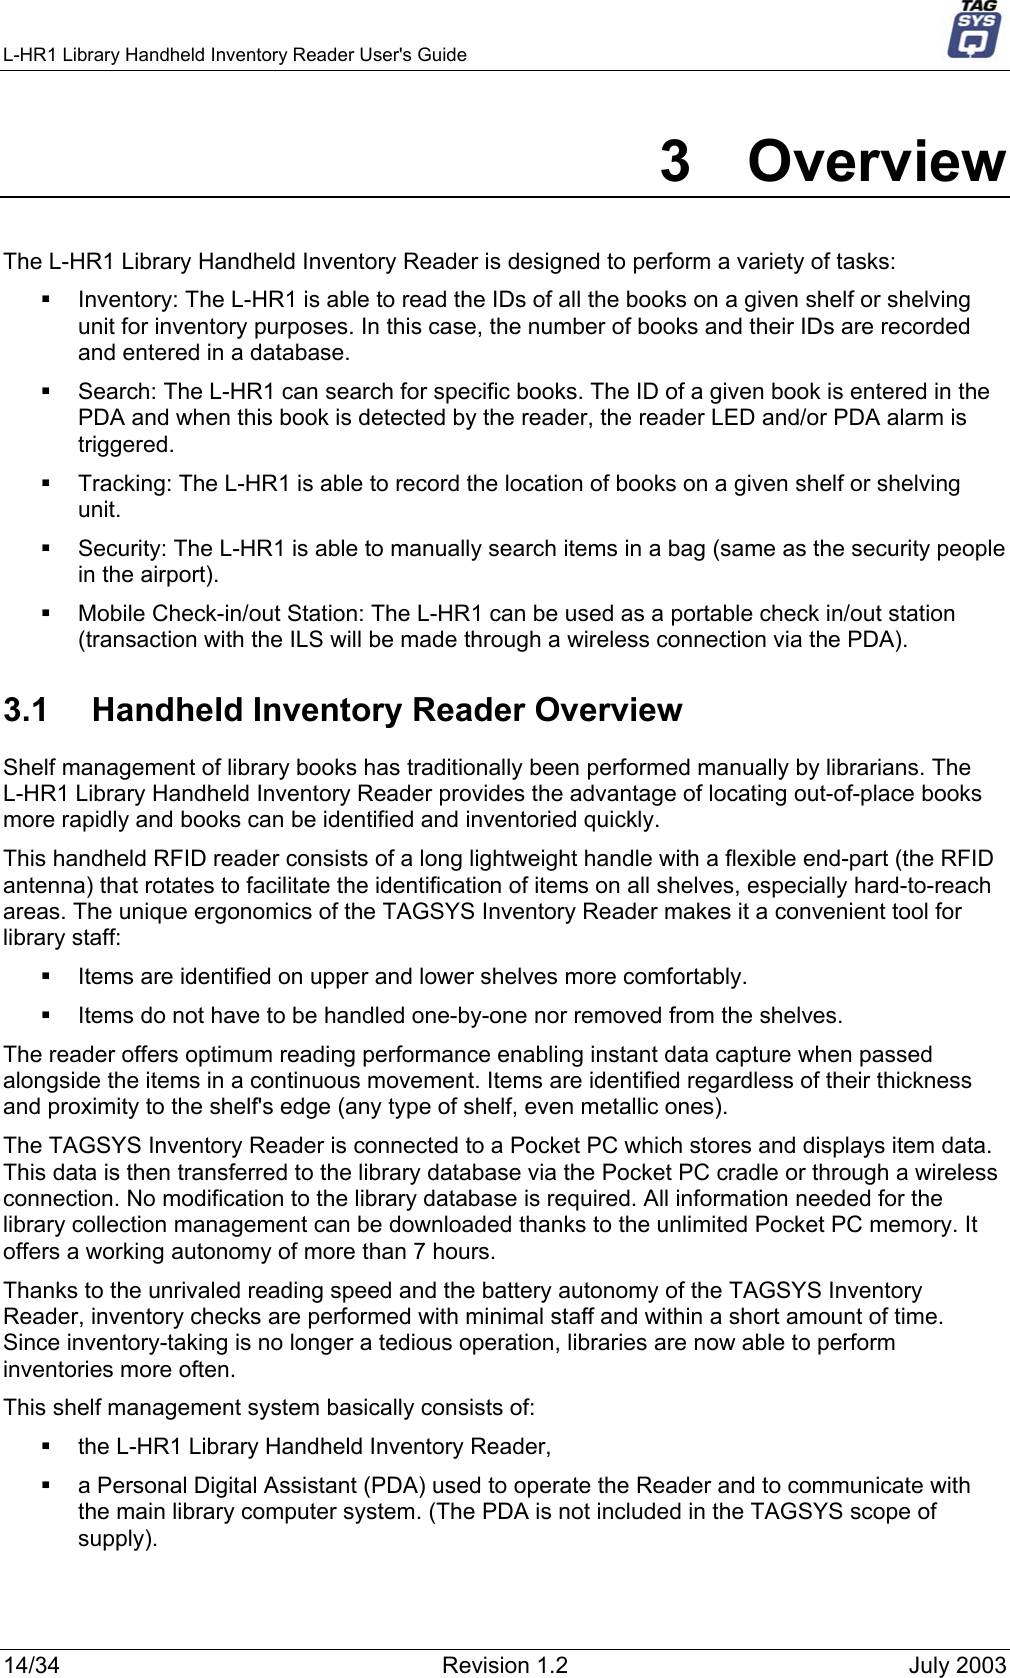 L-HR1 Library Handheld Inventory Reader User&apos;s Guide     3 Overview The L-HR1 Library Handheld Inventory Reader is designed to perform a variety of tasks:   Inventory: The L-HR1 is able to read the IDs of all the books on a given shelf or shelving unit for inventory purposes. In this case, the number of books and their IDs are recorded and entered in a database.   Search: The L-HR1 can search for specific books. The ID of a given book is entered in the PDA and when this book is detected by the reader, the reader LED and/or PDA alarm is triggered.   Tracking: The L-HR1 is able to record the location of books on a given shelf or shelving unit.   Security: The L-HR1 is able to manually search items in a bag (same as the security people in the airport).   Mobile Check-in/out Station: The L-HR1 can be used as a portable check in/out station (transaction with the ILS will be made through a wireless connection via the PDA). 3.1  Handheld Inventory Reader Overview Shelf management of library books has traditionally been performed manually by librarians. The L-HR1 Library Handheld Inventory Reader provides the advantage of locating out-of-place books more rapidly and books can be identified and inventoried quickly.  This handheld RFID reader consists of a long lightweight handle with a flexible end-part (the RFID antenna) that rotates to facilitate the identification of items on all shelves, especially hard-to-reach areas. The unique ergonomics of the TAGSYS Inventory Reader makes it a convenient tool for library staff:   Items are identified on upper and lower shelves more comfortably.   Items do not have to be handled one-by-one nor removed from the shelves. The reader offers optimum reading performance enabling instant data capture when passed alongside the items in a continuous movement. Items are identified regardless of their thickness and proximity to the shelf&apos;s edge (any type of shelf, even metallic ones). The TAGSYS Inventory Reader is connected to a Pocket PC which stores and displays item data. This data is then transferred to the library database via the Pocket PC cradle or through a wireless connection. No modification to the library database is required. All information needed for the library collection management can be downloaded thanks to the unlimited Pocket PC memory. It offers a working autonomy of more than 7 hours. Thanks to the unrivaled reading speed and the battery autonomy of the TAGSYS Inventory Reader, inventory checks are performed with minimal staff and within a short amount of time. Since inventory-taking is no longer a tedious operation, libraries are now able to perform inventories more often. This shelf management system basically consists of:    the L-HR1 Library Handheld Inventory Reader,   a Personal Digital Assistant (PDA) used to operate the Reader and to communicate with the main library computer system. (The PDA is not included in the TAGSYS scope of supply). 14/34  Revision 1.2  July 2003 